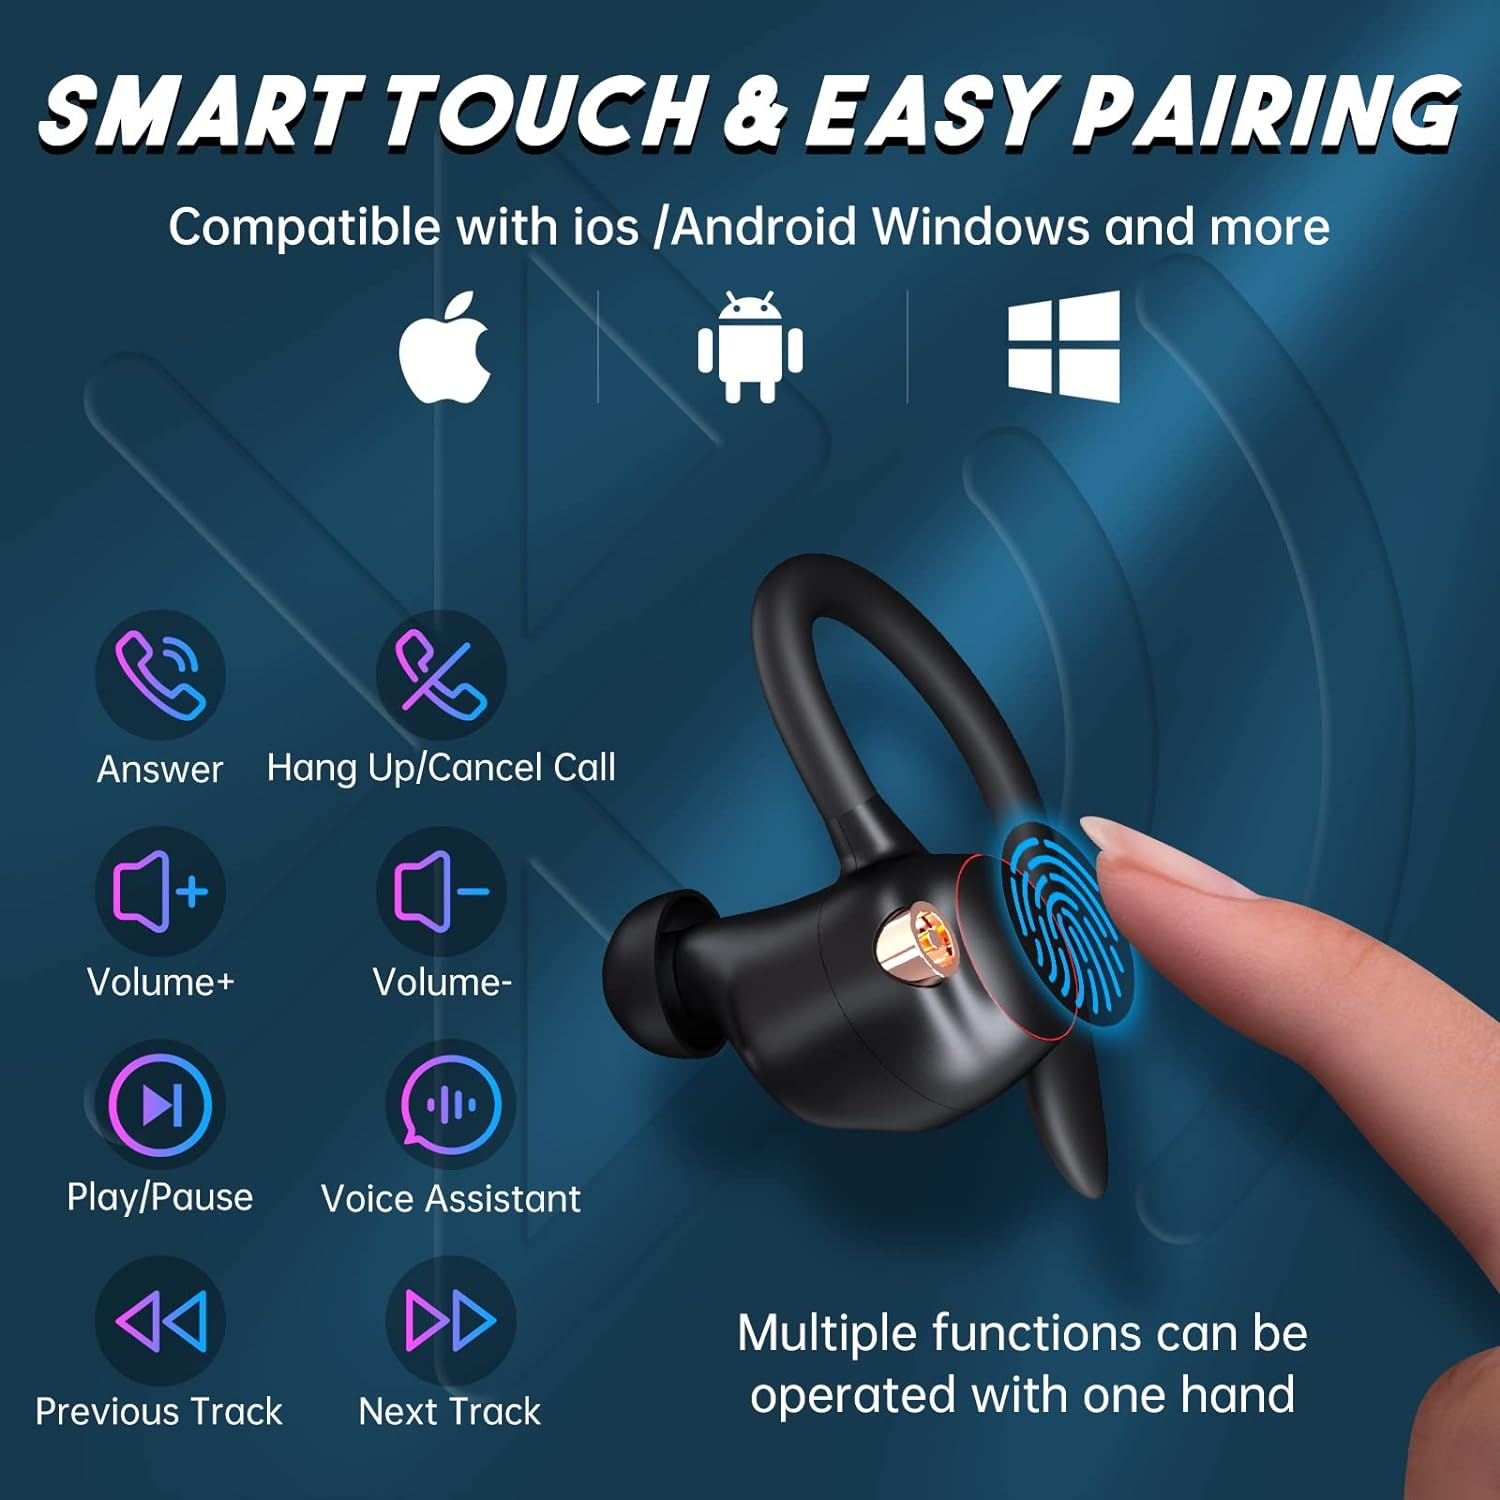 NANSON Headphones Wireless Earbuds 60hrs Playback IPX7 Waterproof Earphones Over-Ear Stereo Bass Headset with Earhooks Microphone LED Battery Display for Sports/Workout/Gym/Running Violet